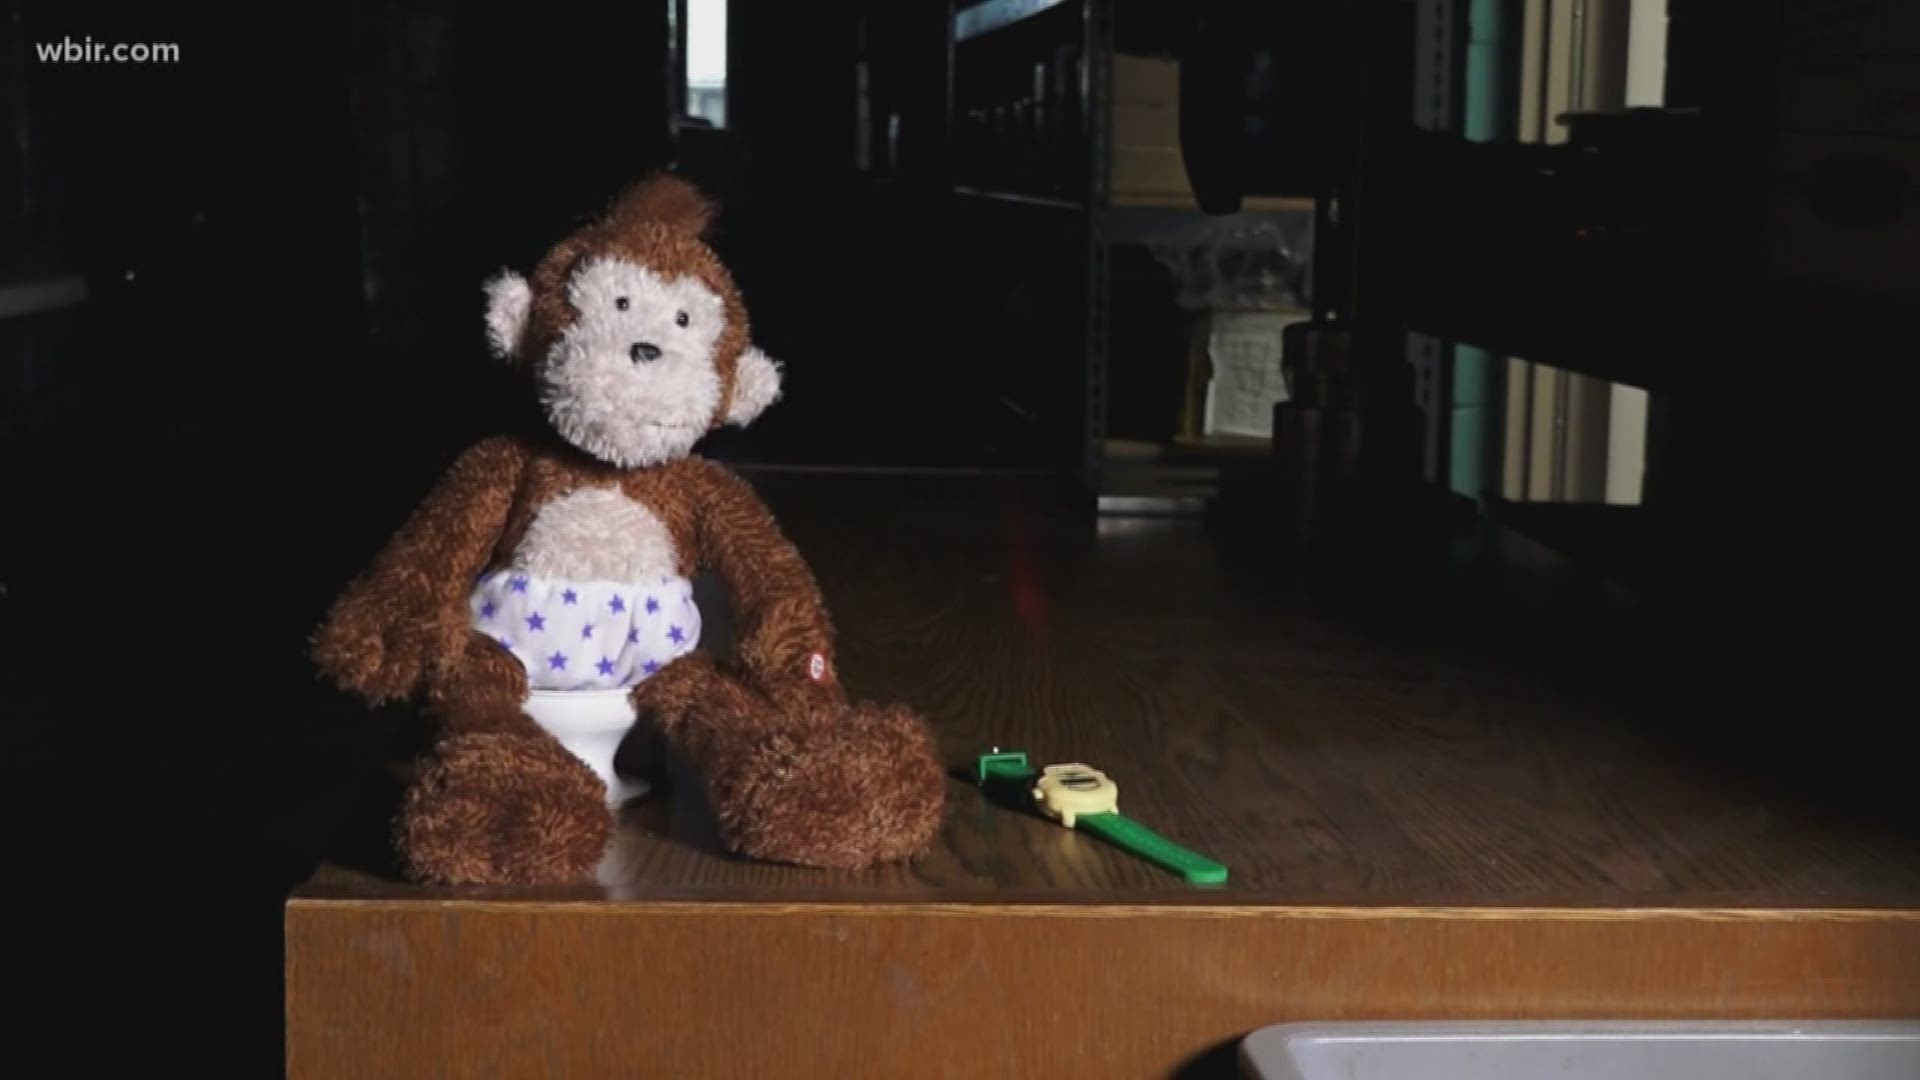 The Potty Monkey aims to potty train kids, and it's based right here in Knoxville.